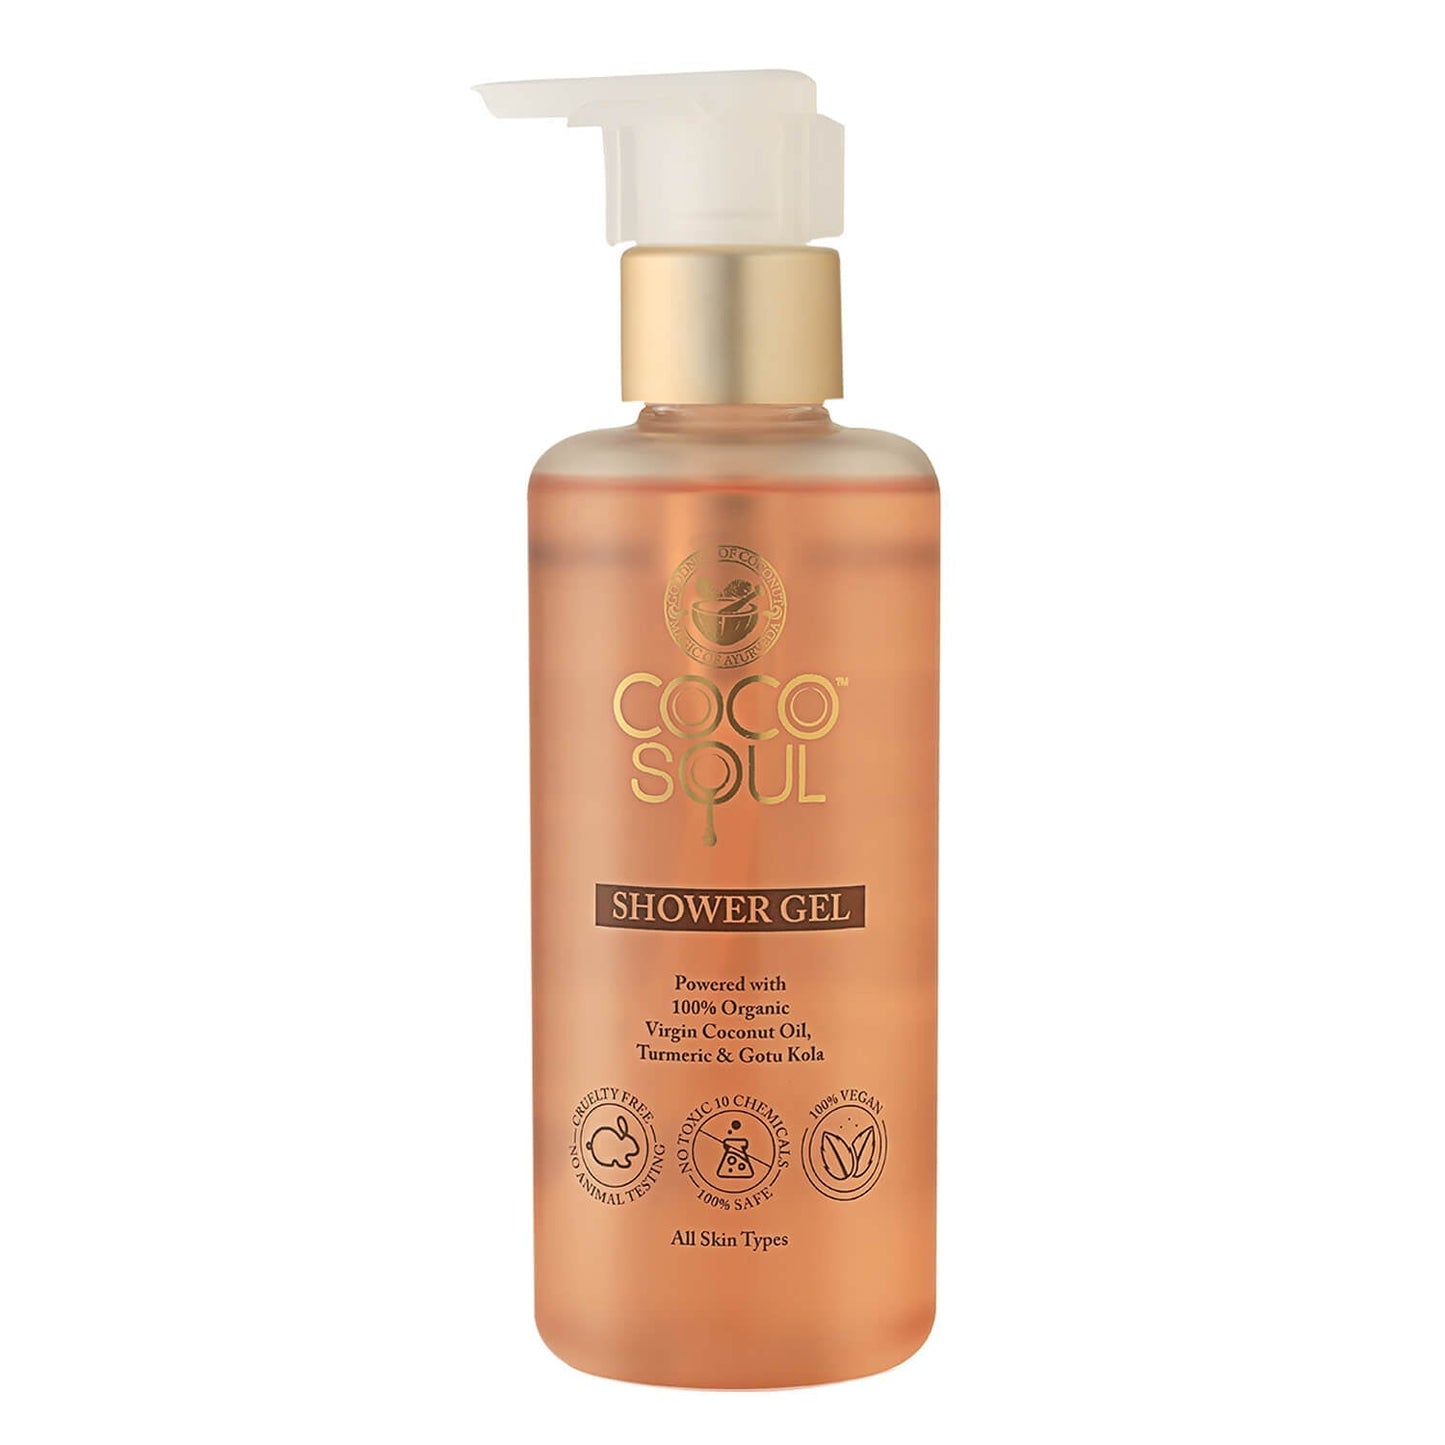 SALE Shower Gel  With Coconut  Ayurveda  Sulphate  Paraben Free  Mineral Oil  Silicones Free  100 Vegan  200ml